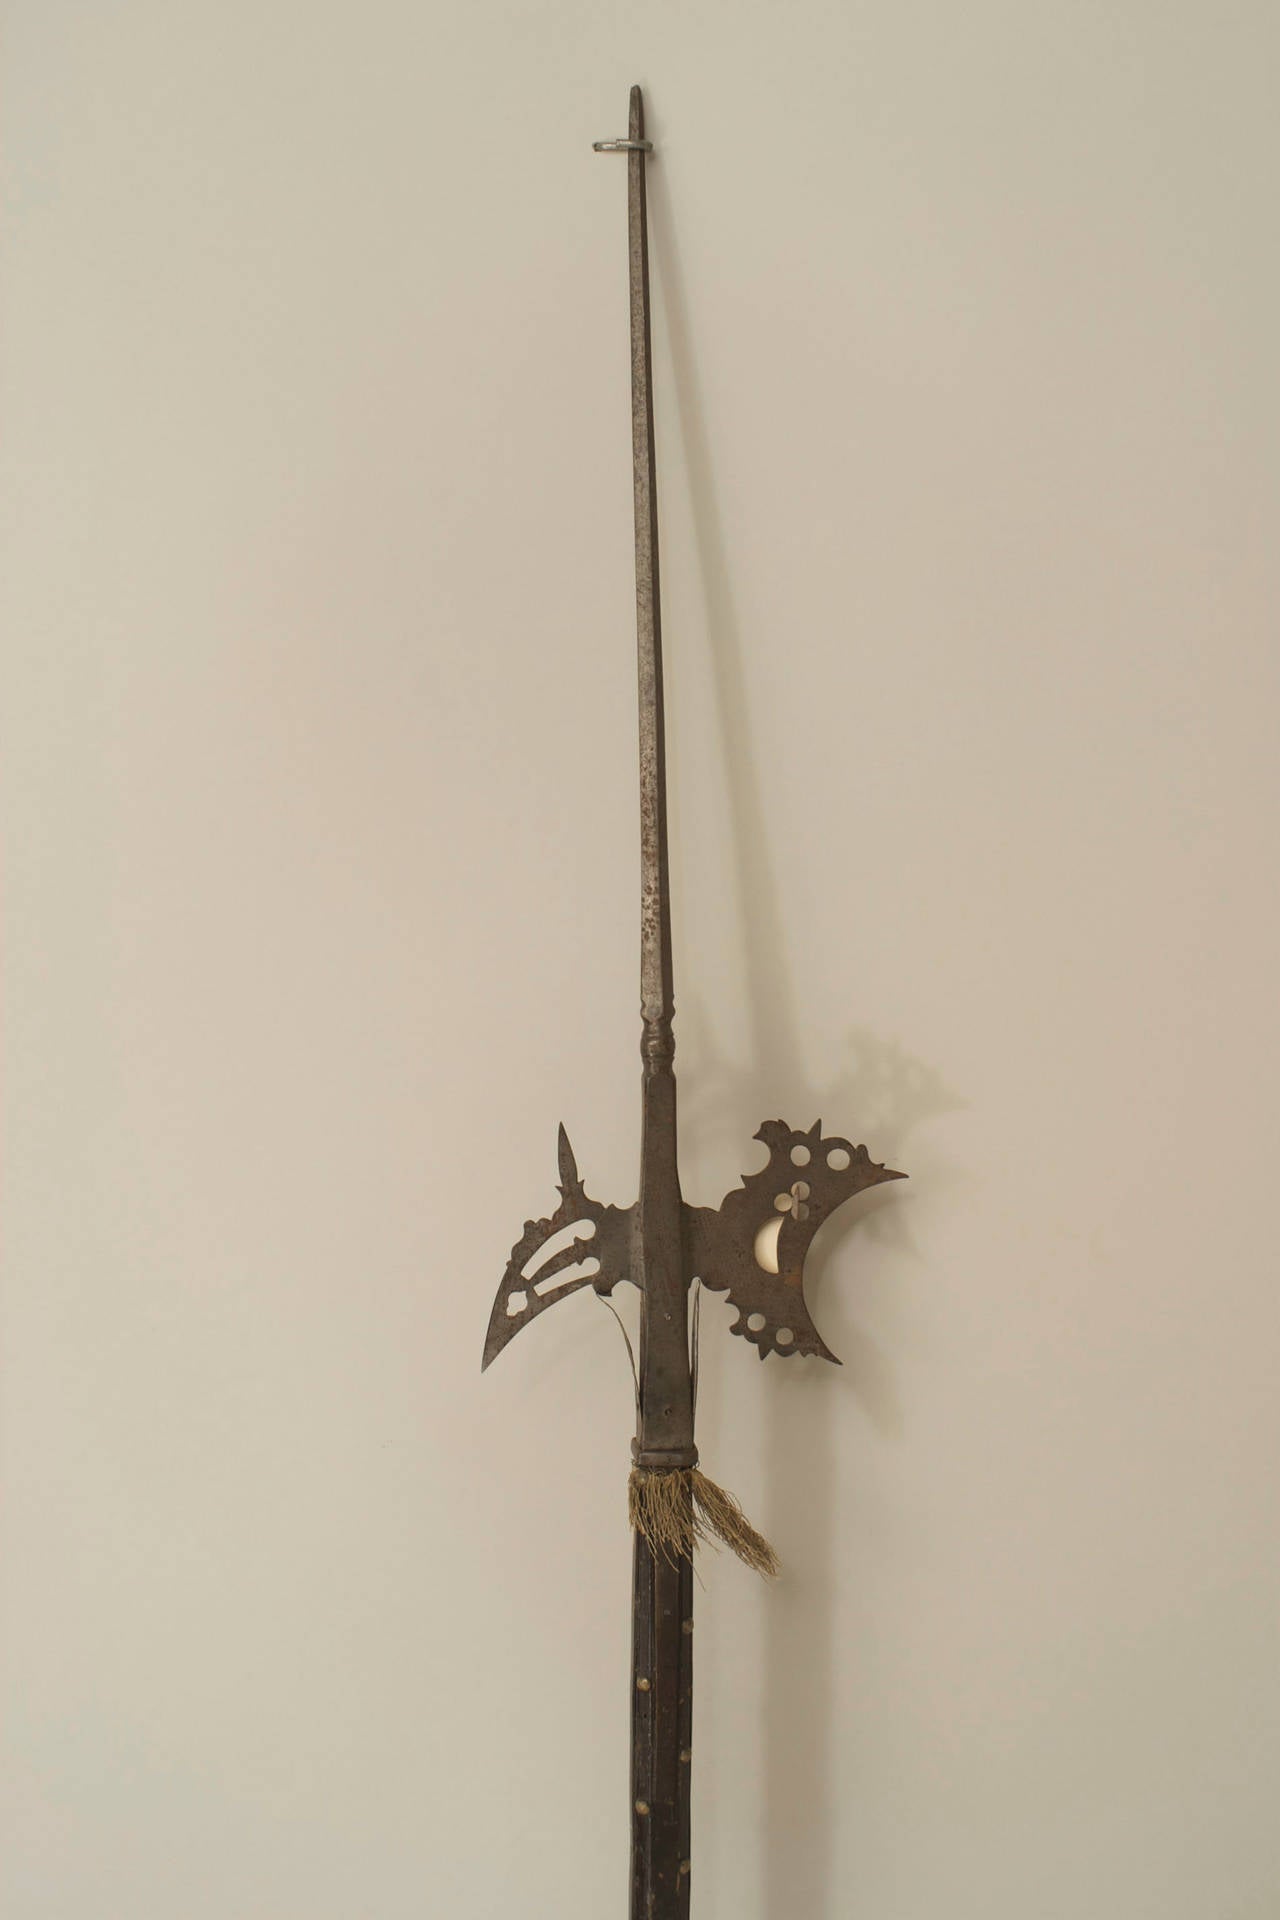 English Renaissance style Halbert spear with wood shaft and small 29